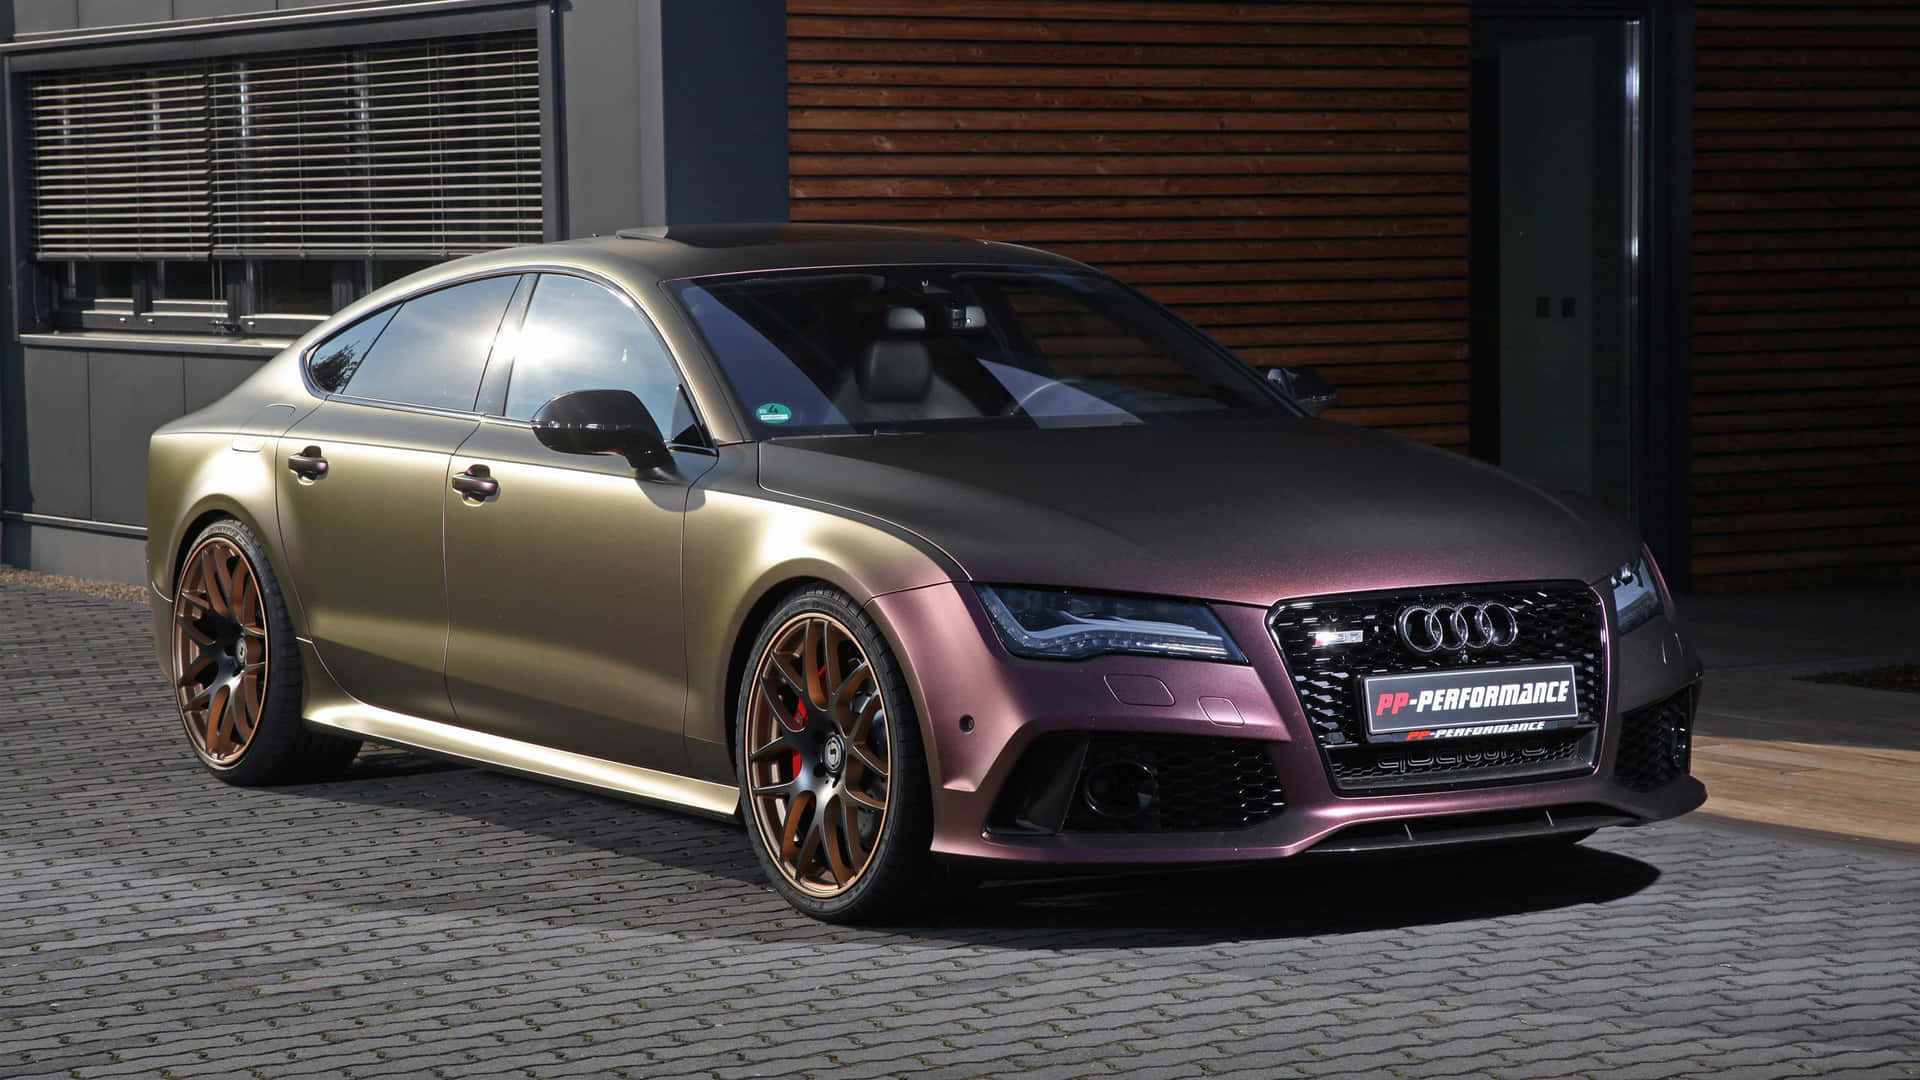 Captivating Audi S7 on the Road Wallpaper